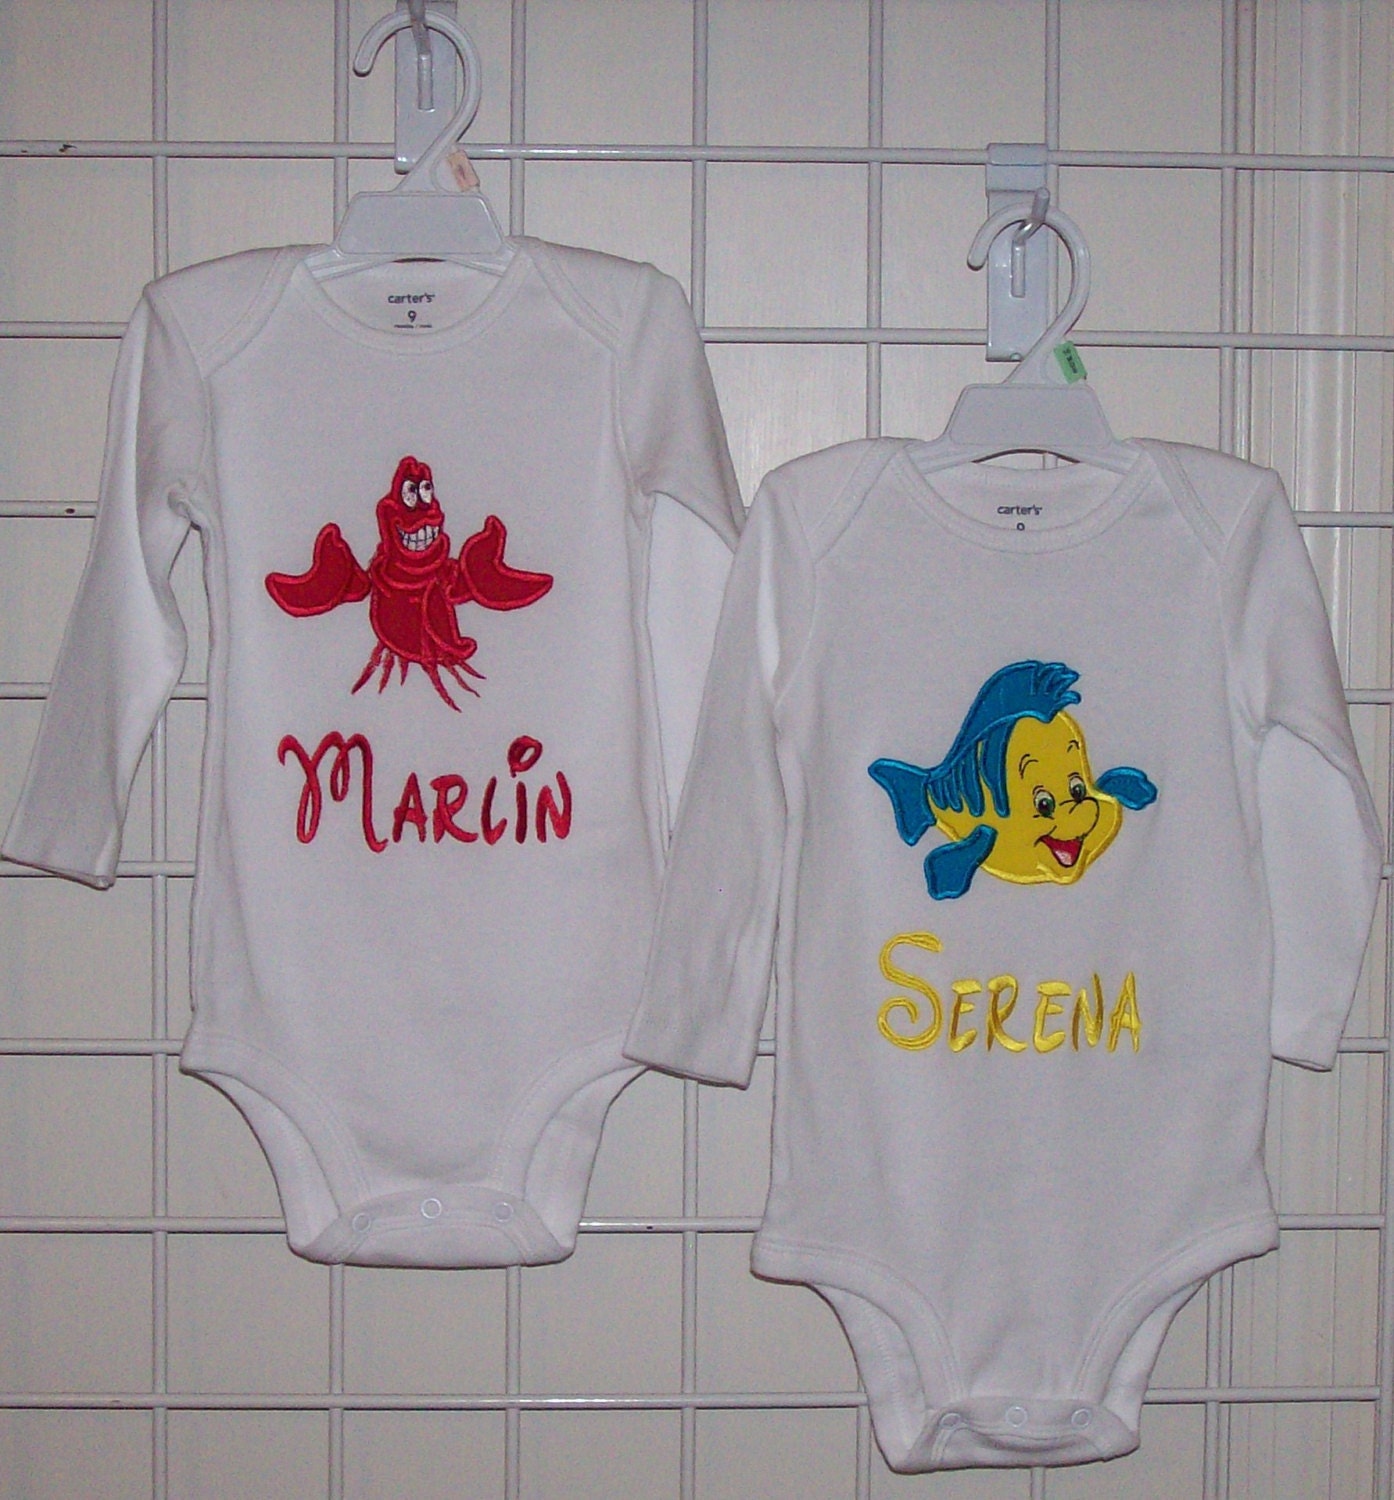 Little Fish Infant One-Piece Bodysuit Clothes Baby Shower Gift Mermaid  Flounder